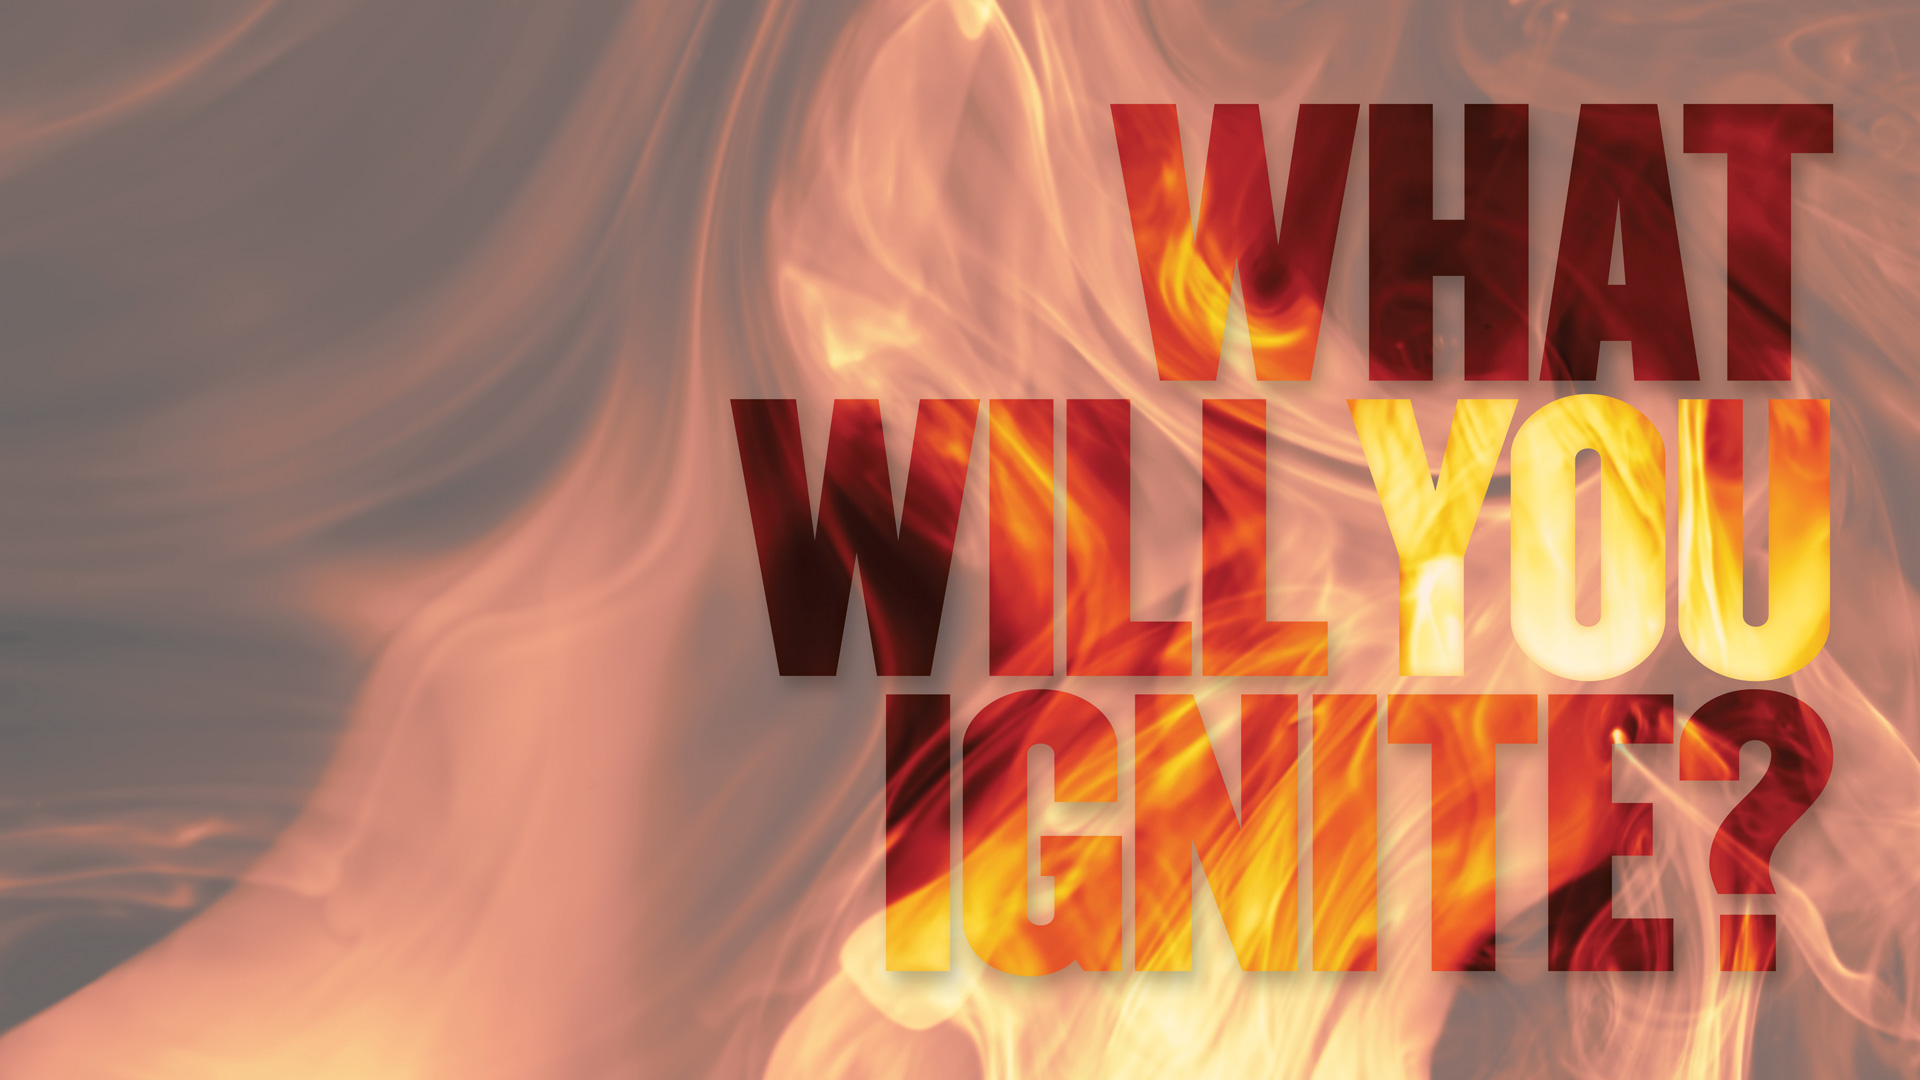 What Will You Ignite written in flames